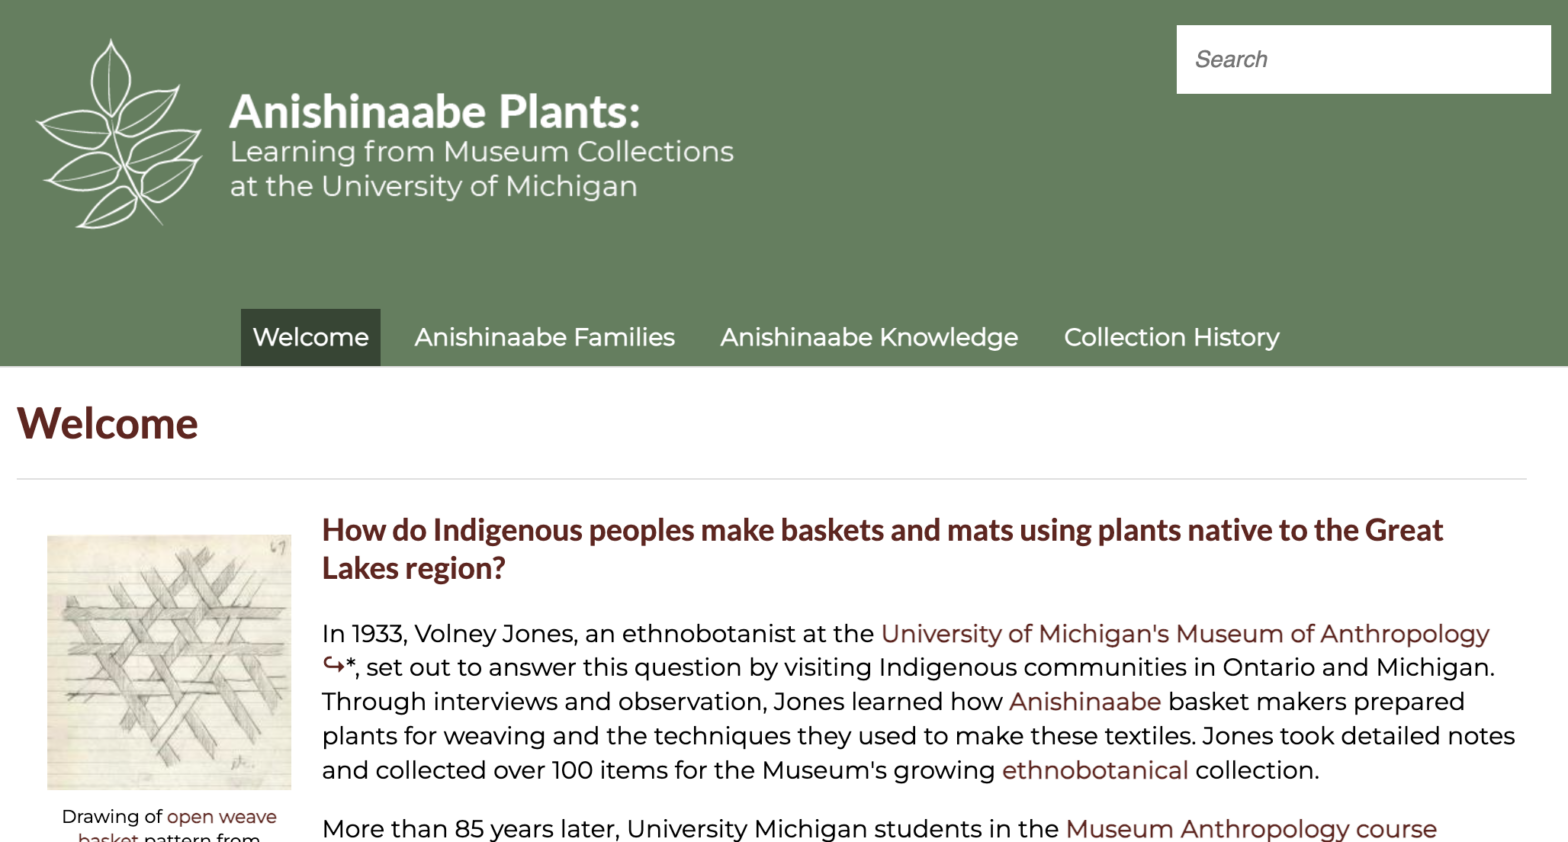 Anishinaabe Plants: Learning from Museum Collections at the University of Michigan